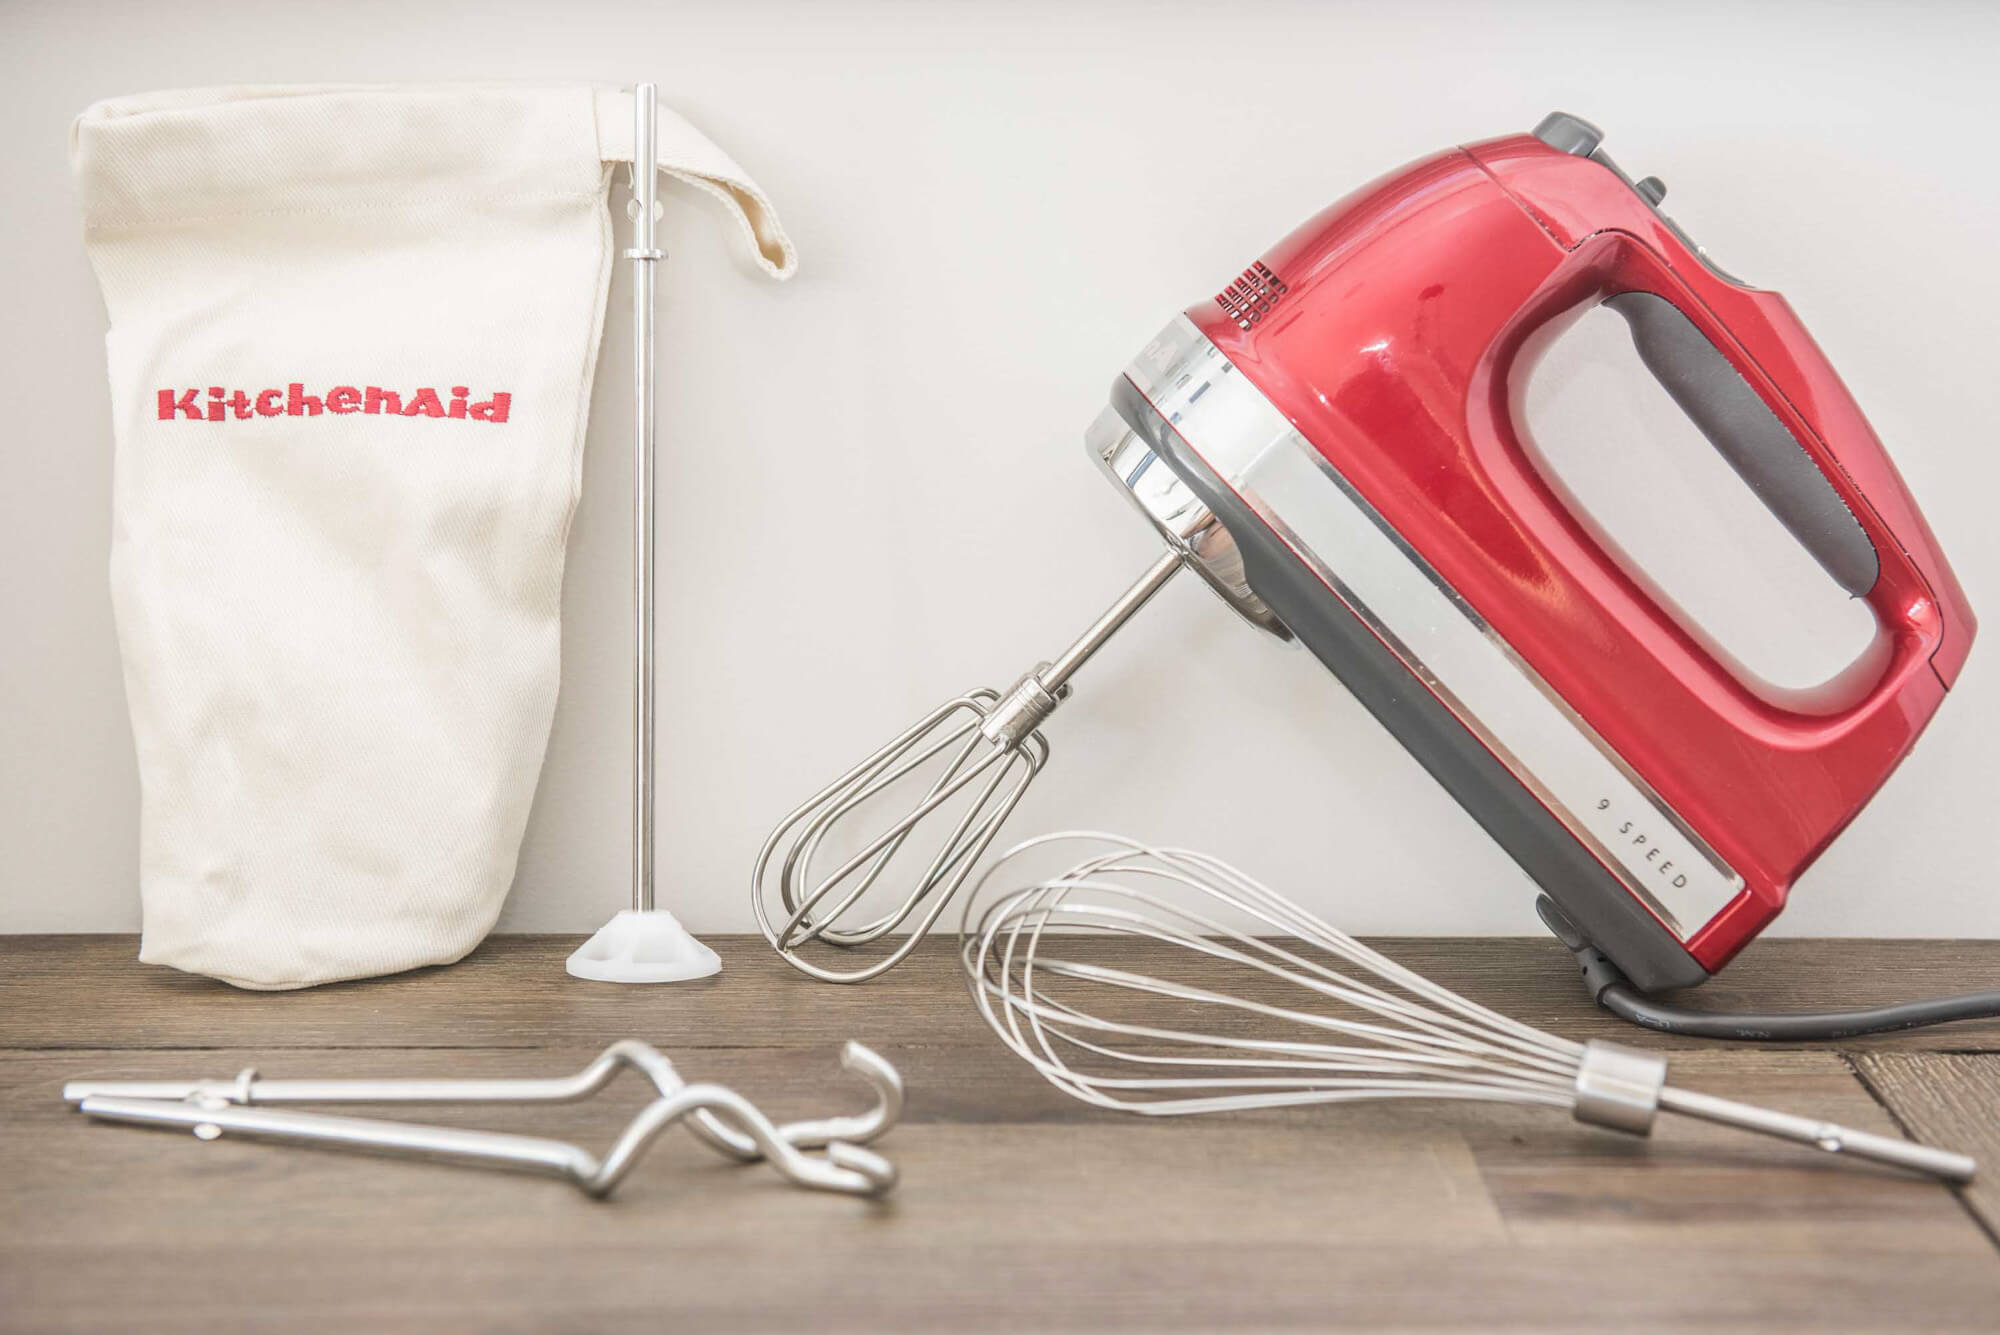 Breville Hand Mixer BHM800SIL Review